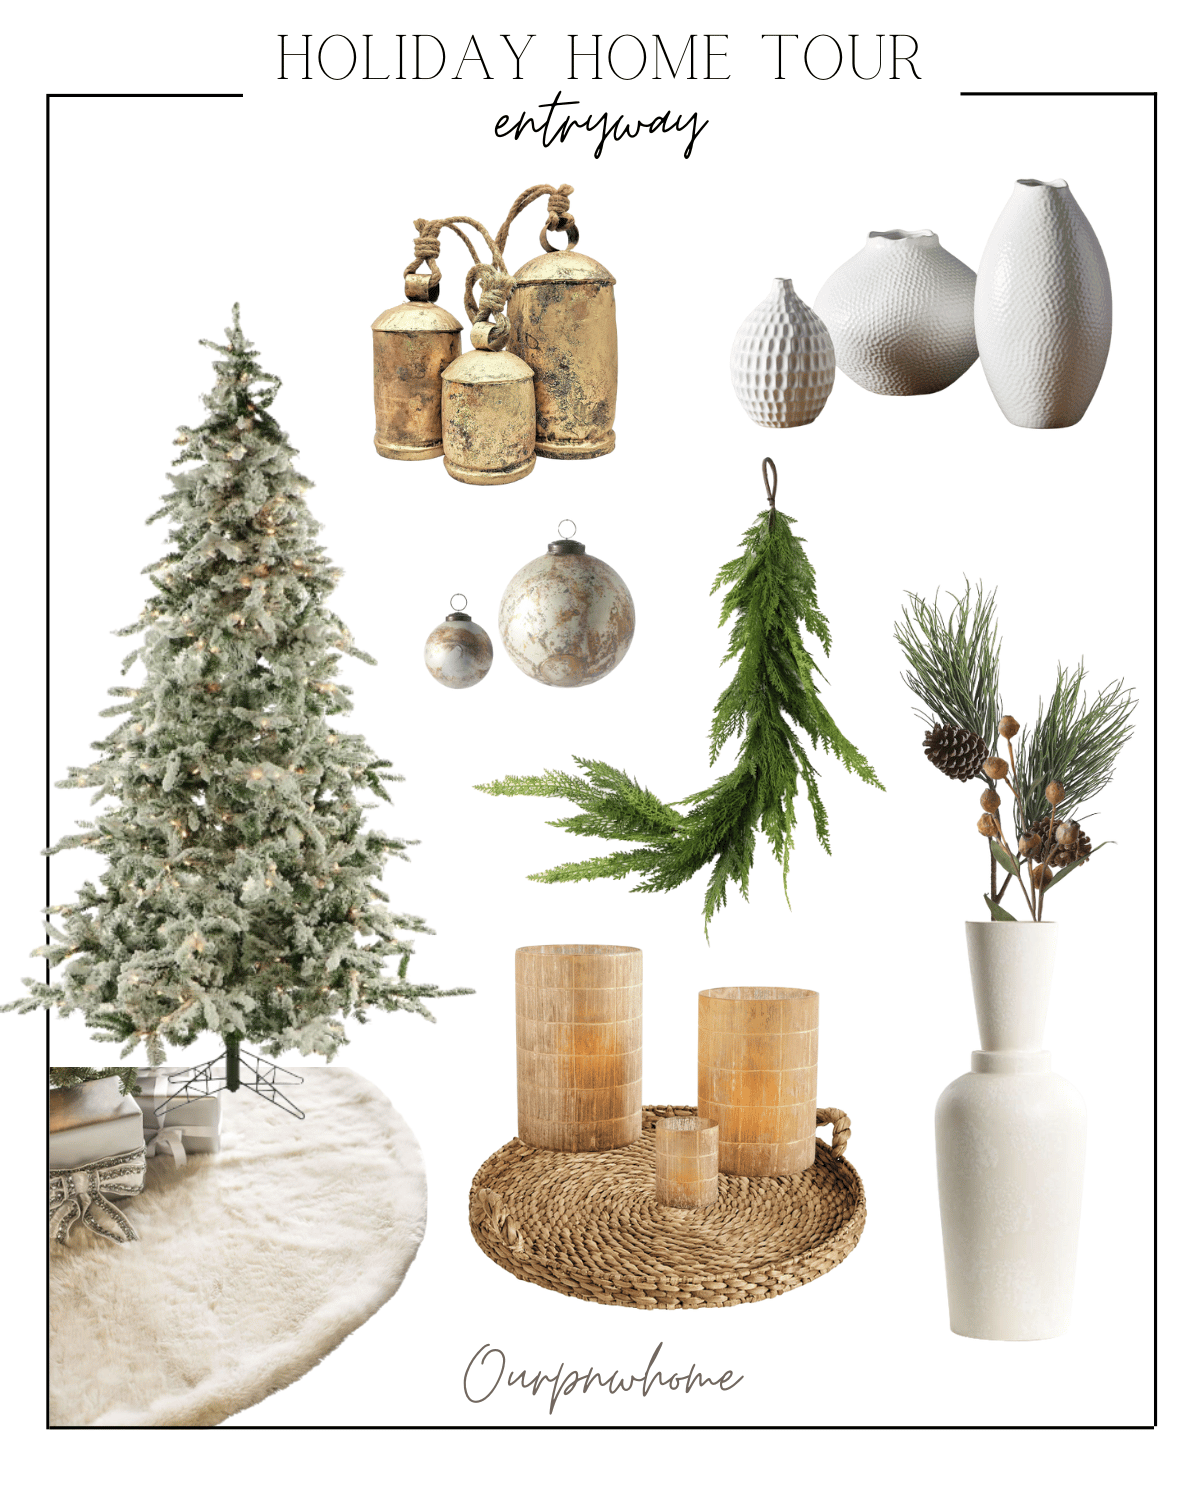 christmas tree, holiday home entryway items, faux fur tree skirt, ornaments, greenery, cream vases, candles, gold cowbells 